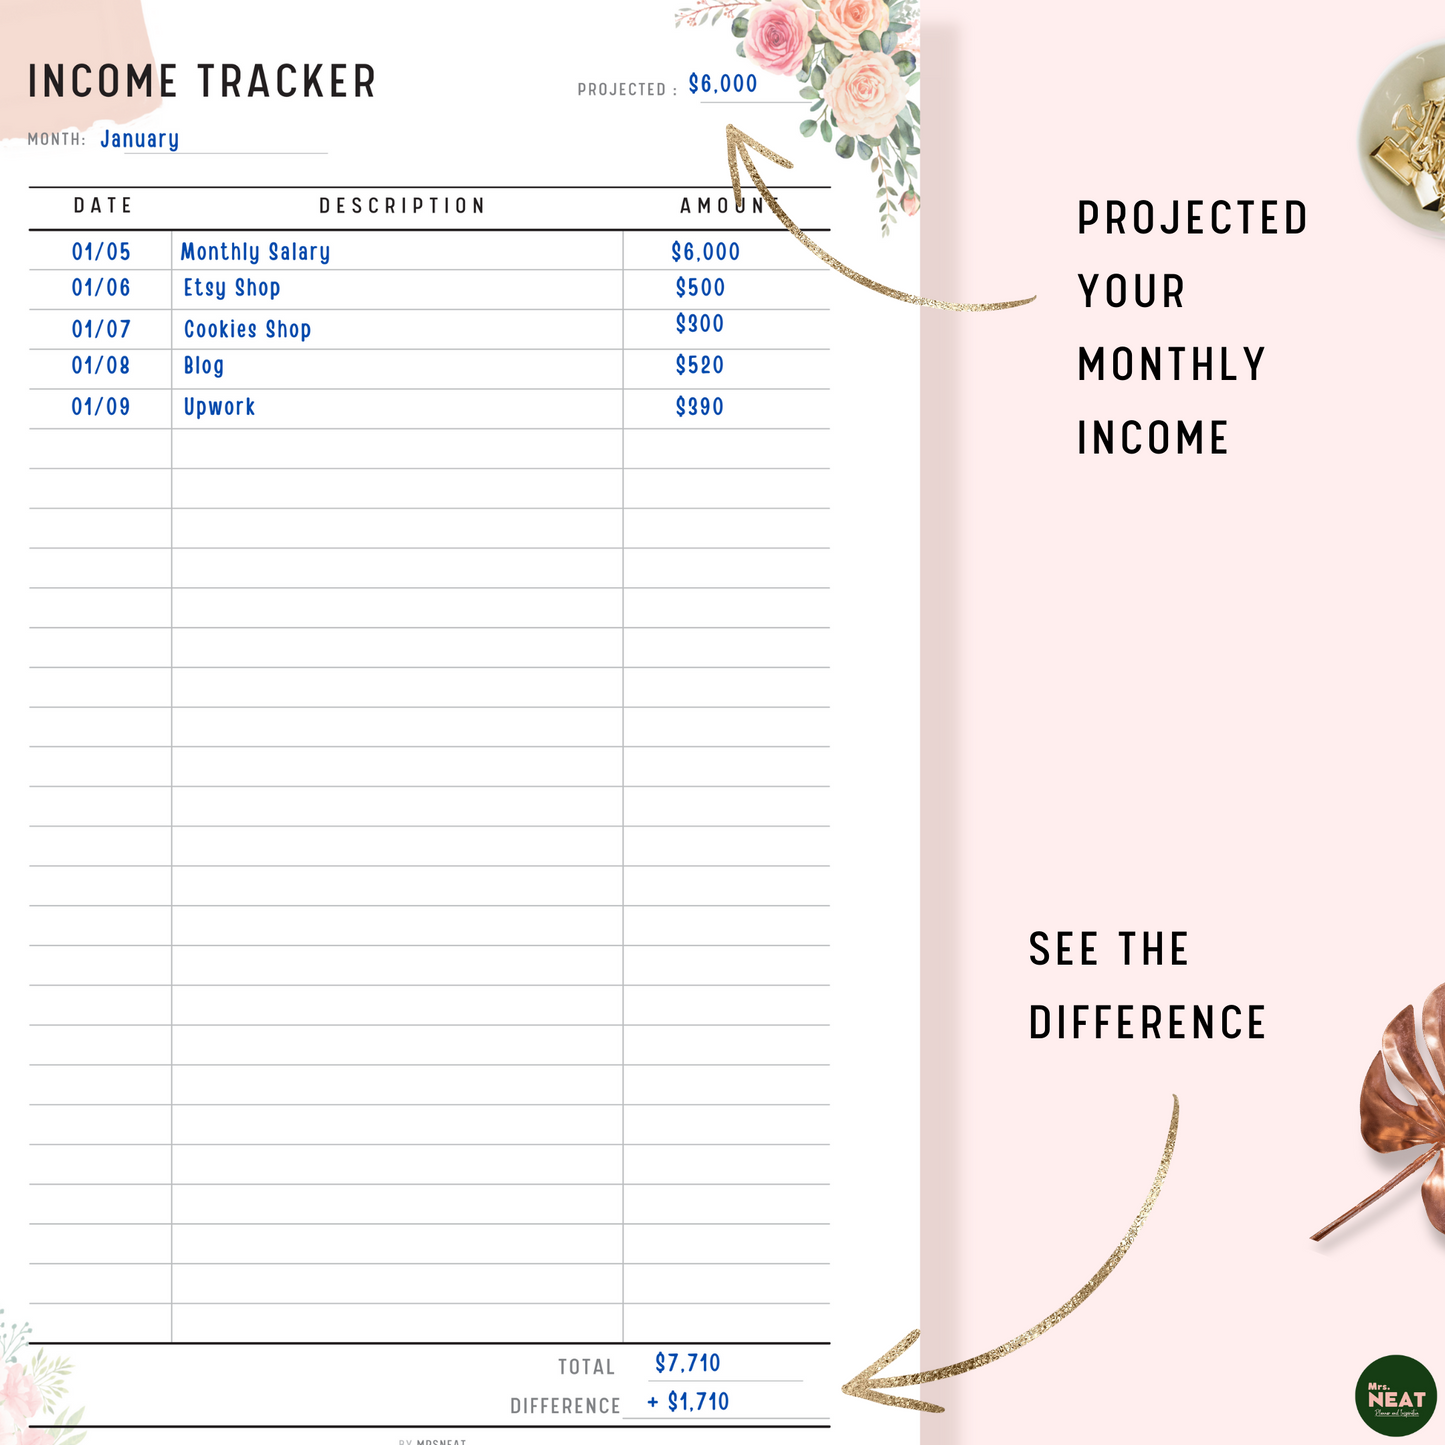 Floral Income Planner with monthly projected, detail list incomes and the difference